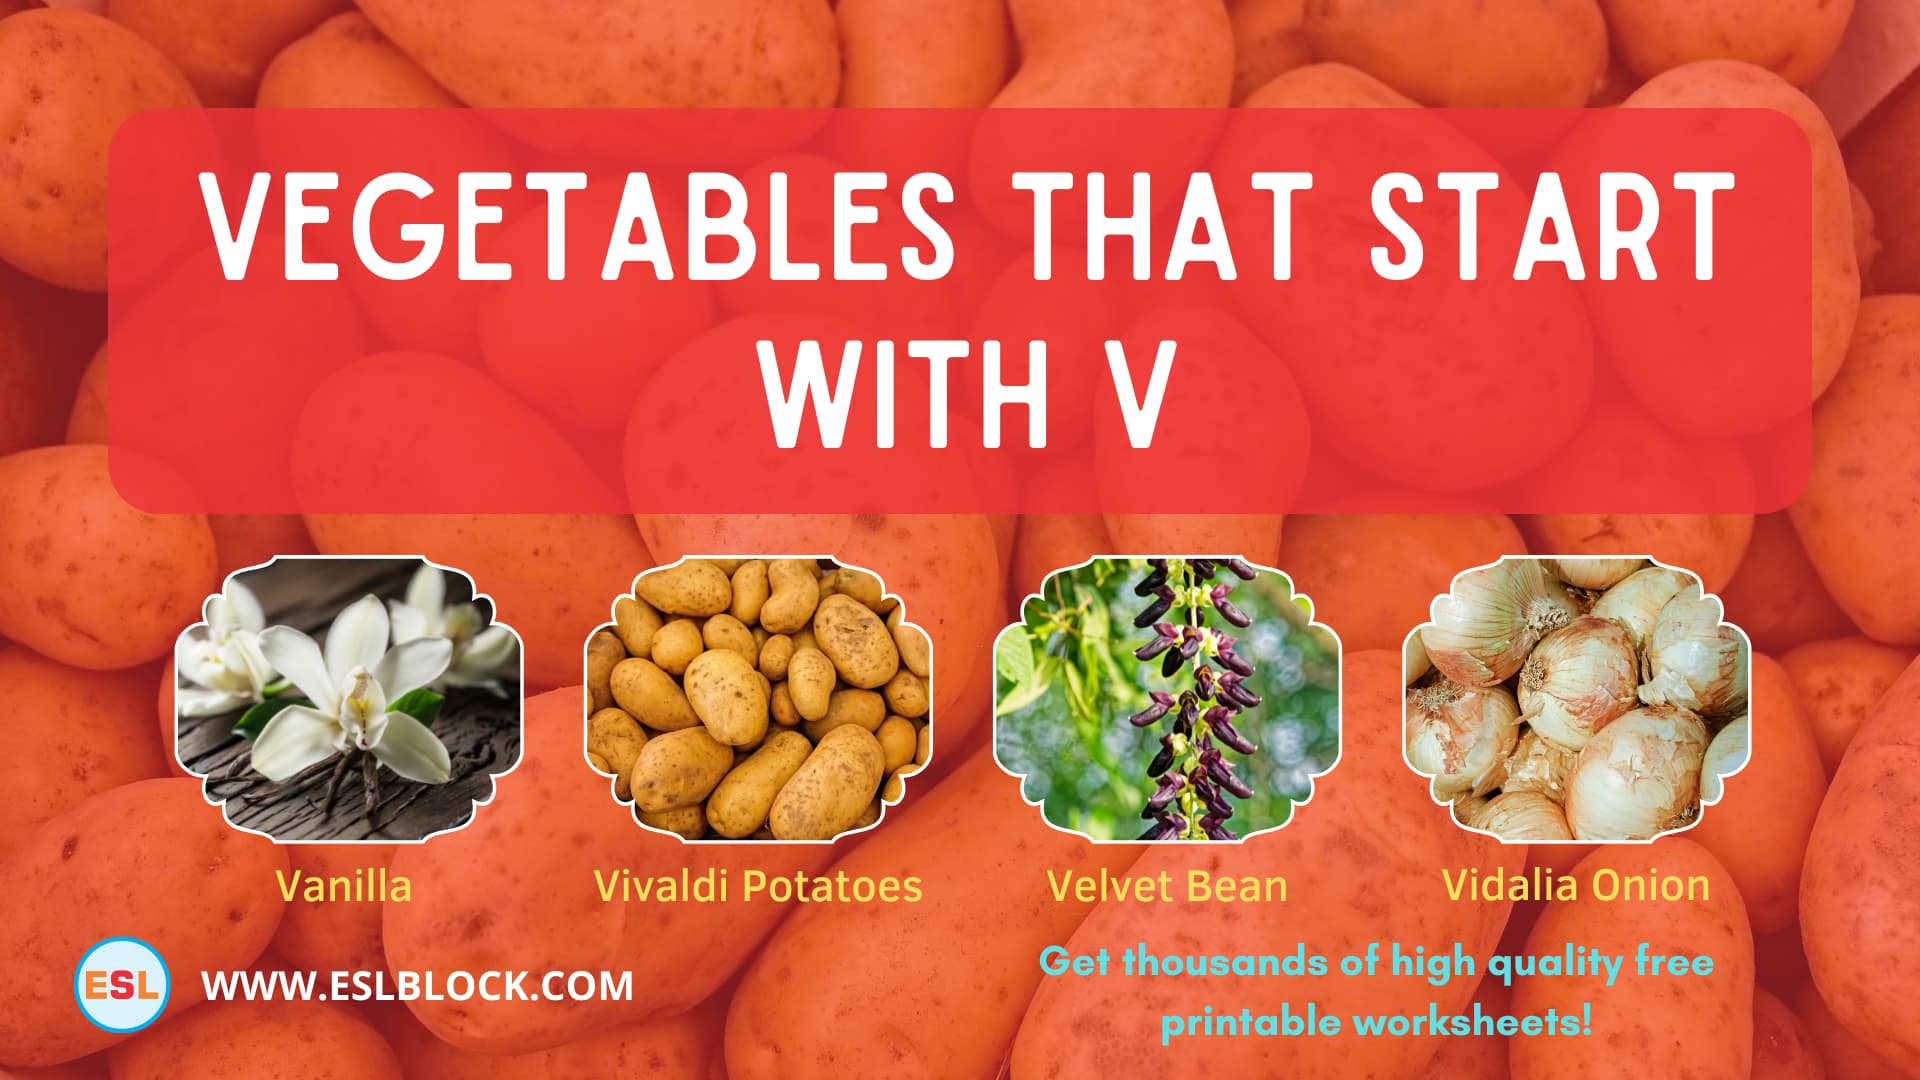 5 Letter Vegetables Starting With V, English, English Nouns, English Vocabulary, English Words, List of Vegetables That Start With V, Nouns, V Vegetables, V Vegetables in English, V Vegetables Names, Vegetables List, Vegetables Names, Vegetables That Begins With V, Vegetables That Start With V, Vocabulary